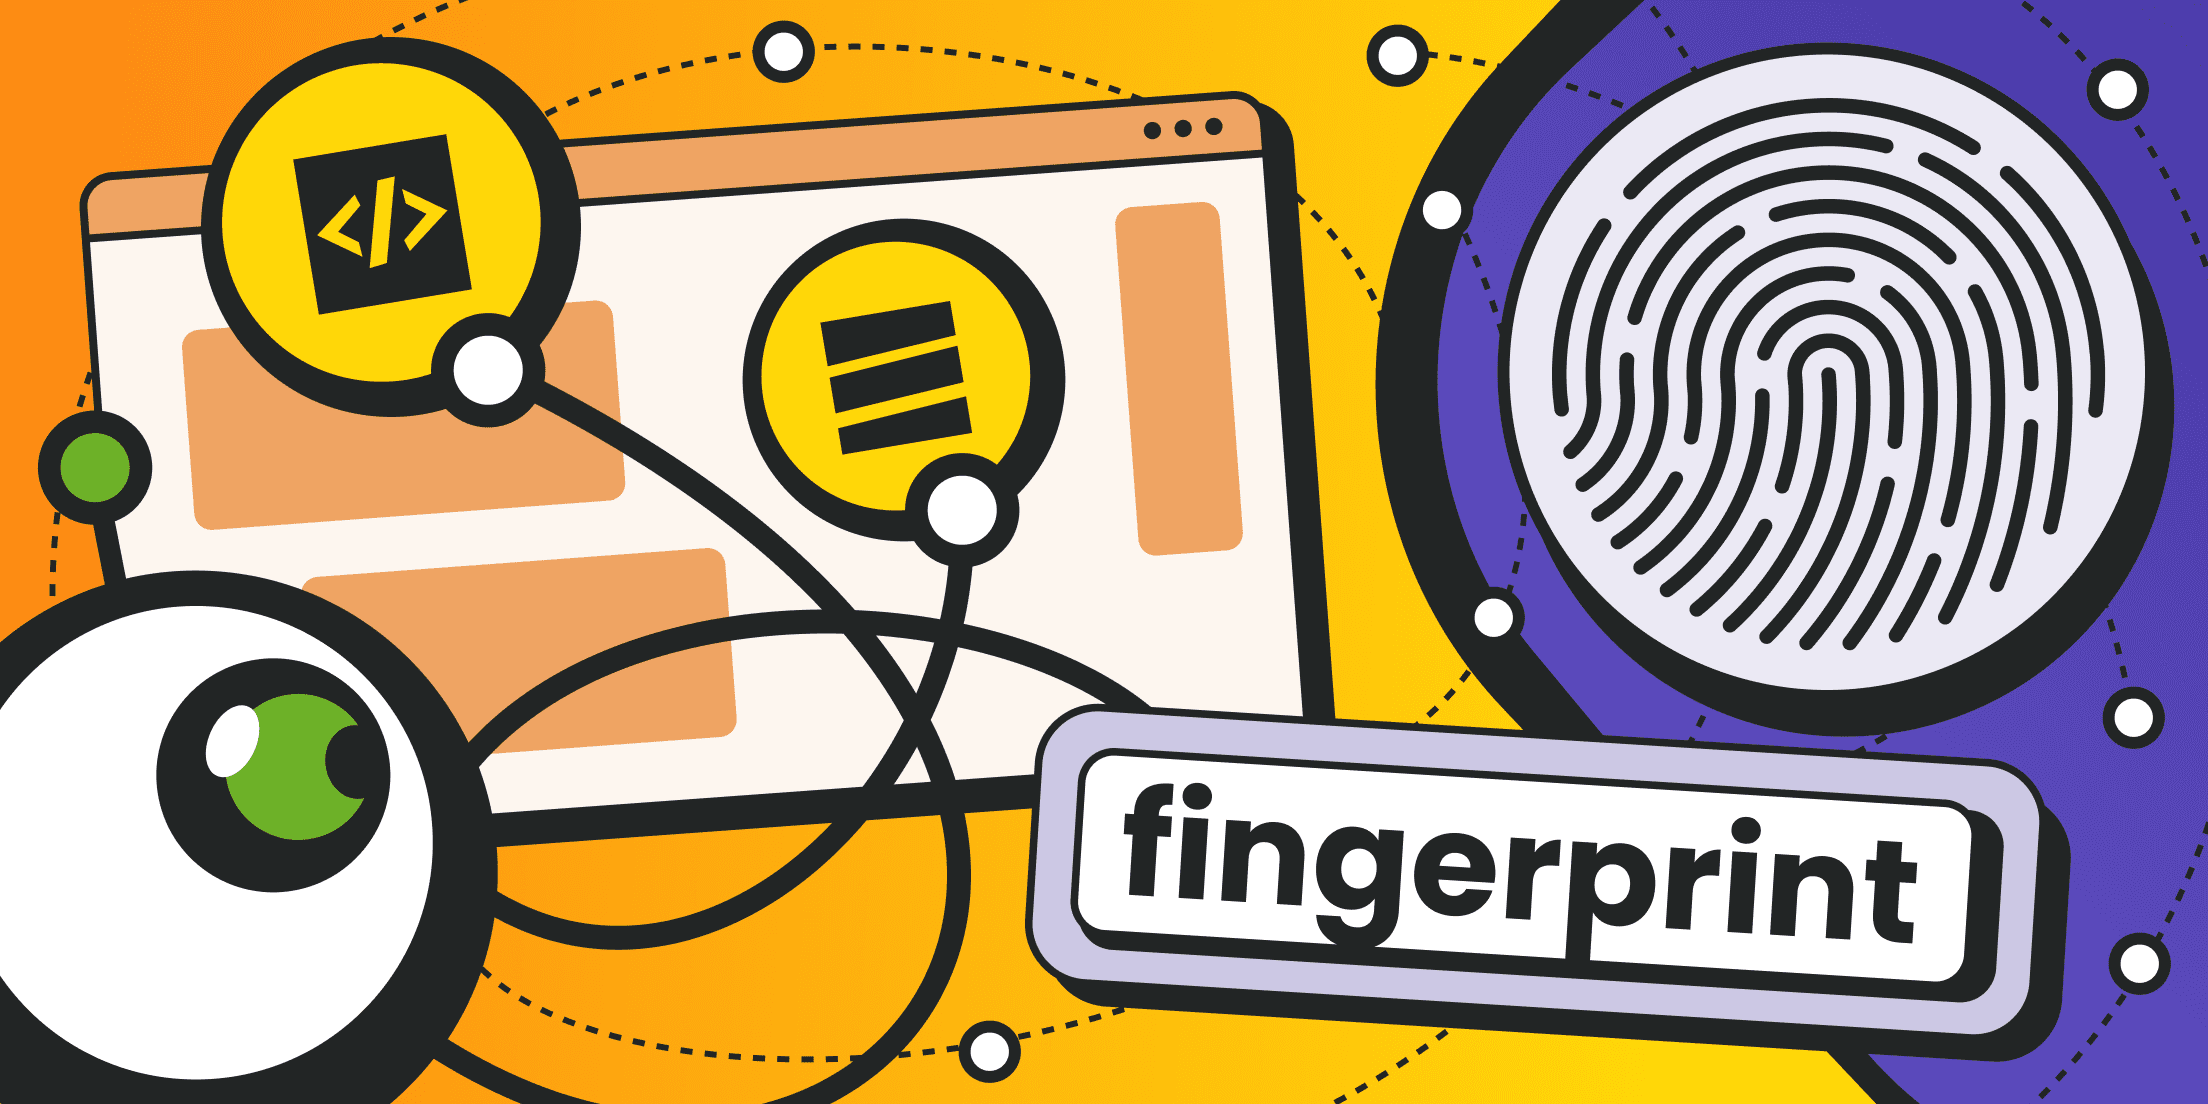 Fingerprint and Web Scraping: What the Connection Is